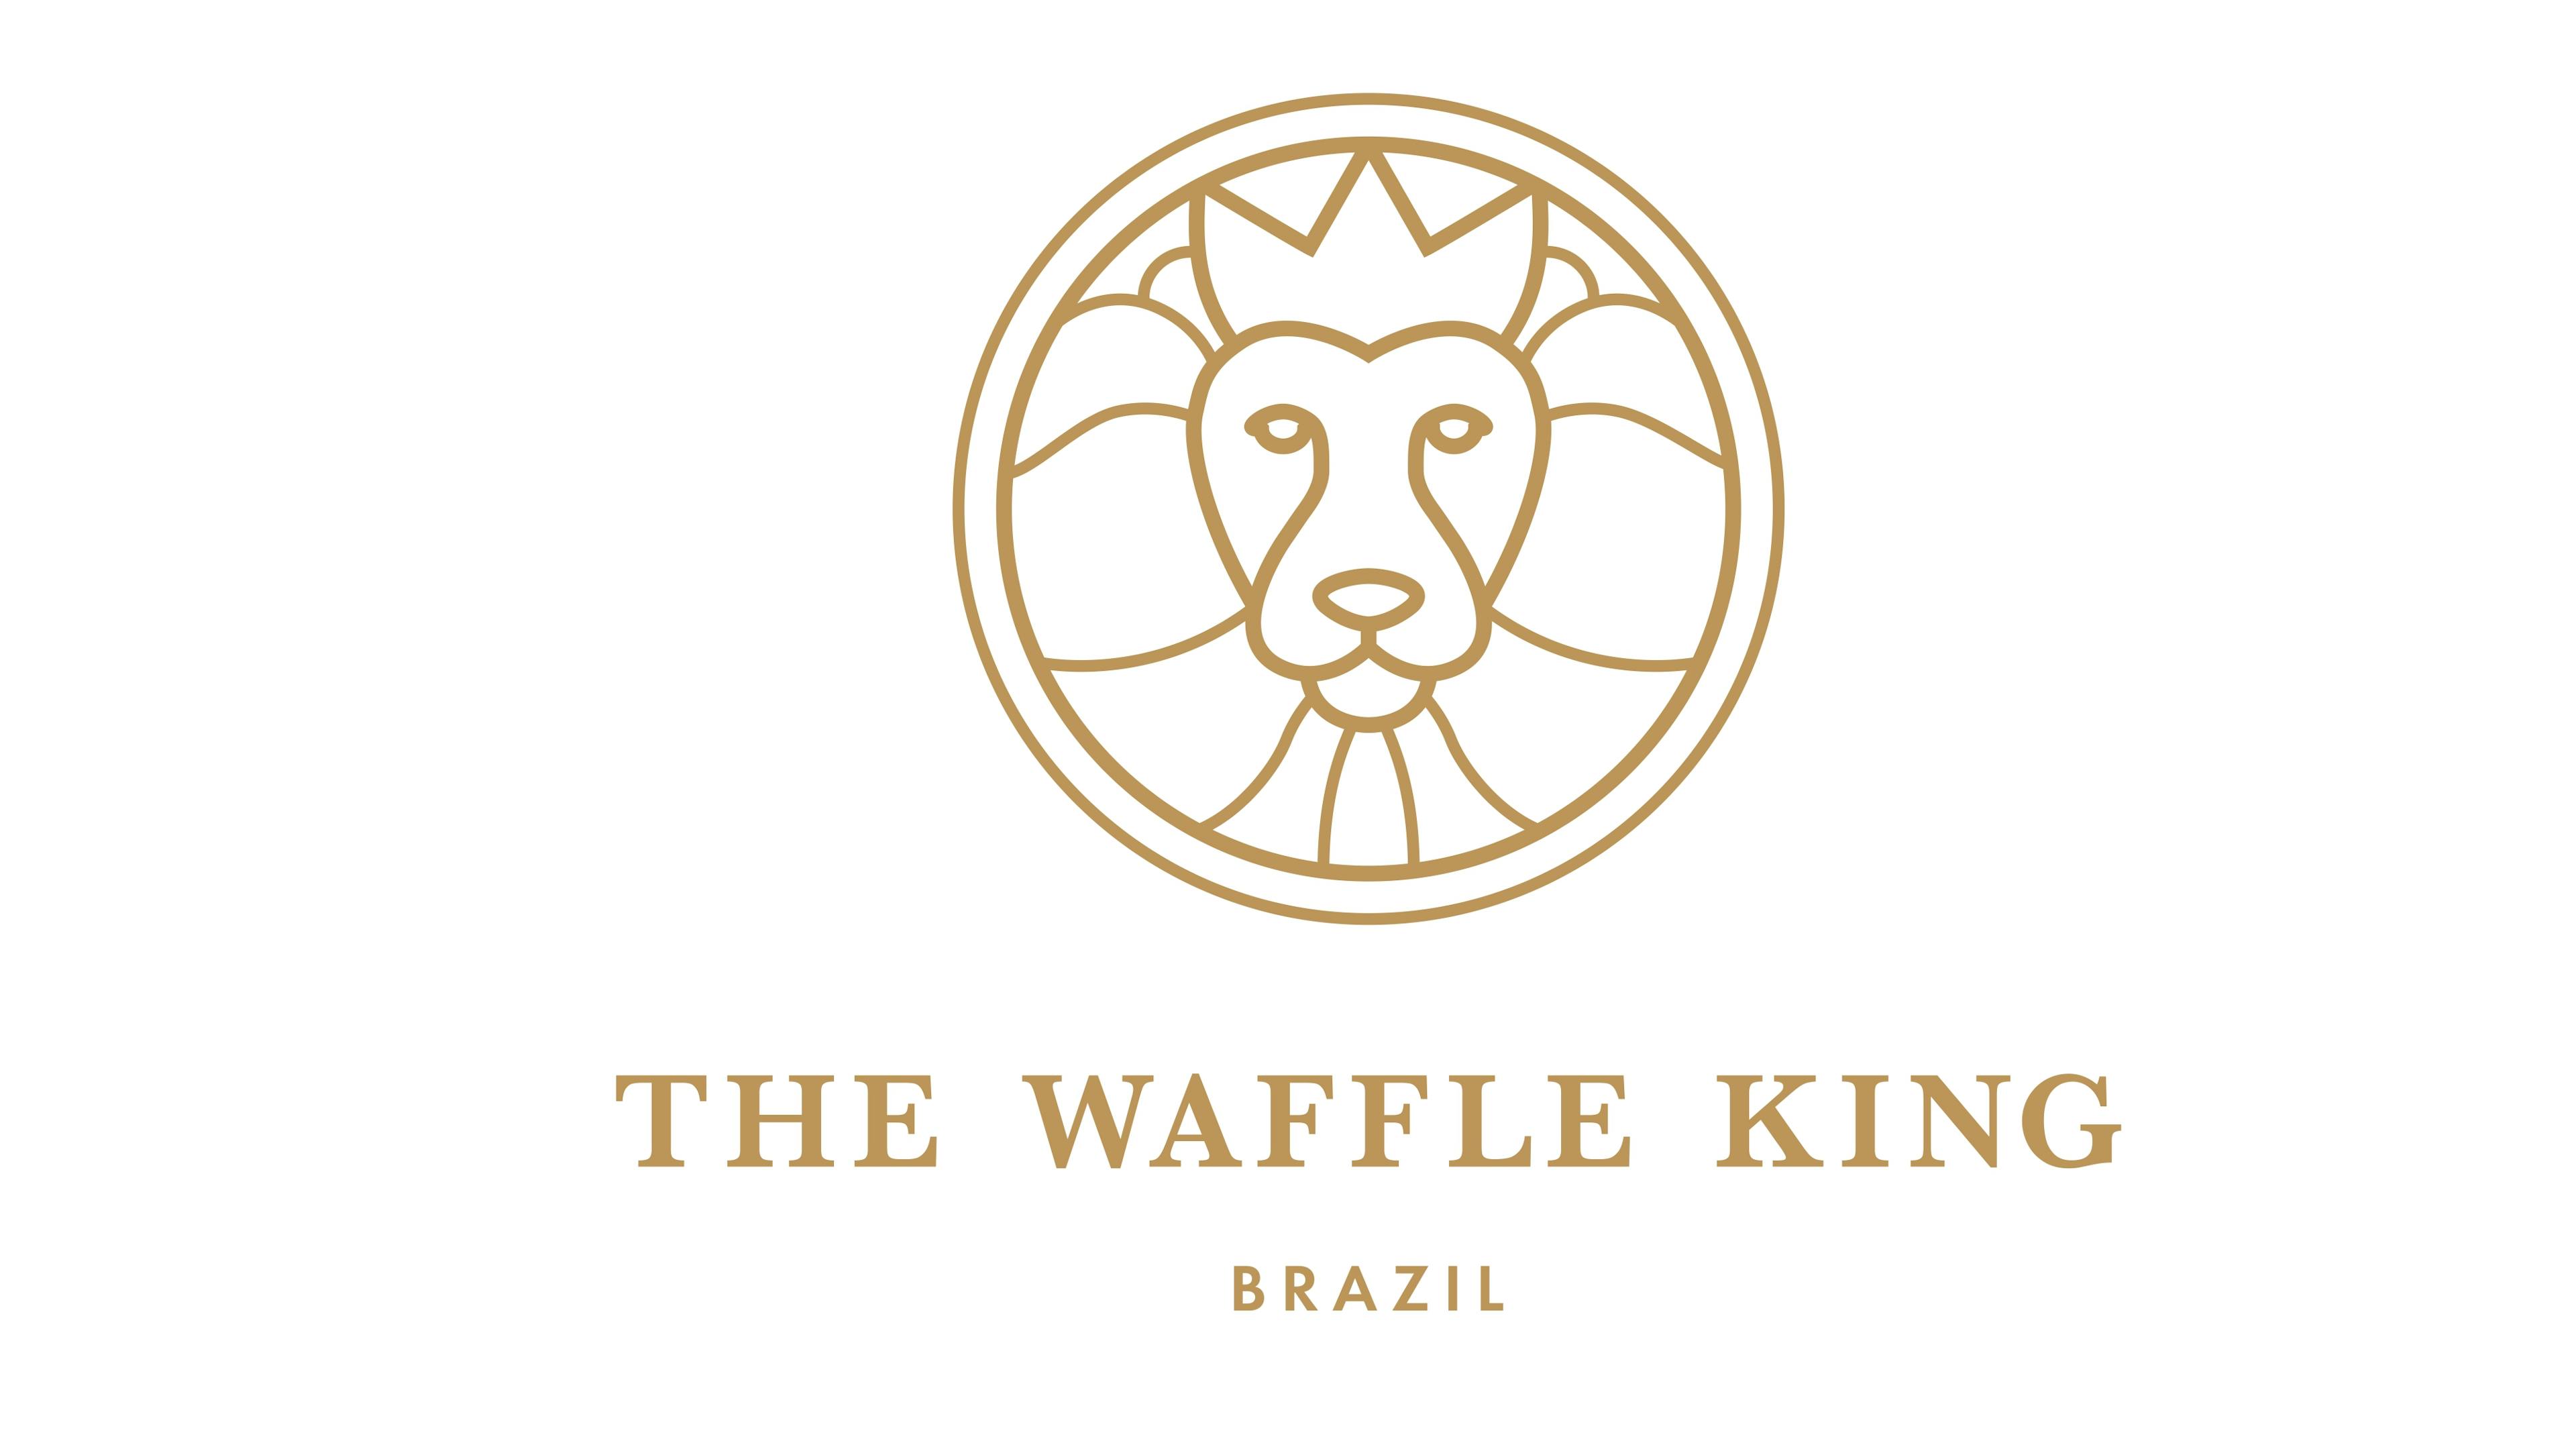 THE WAFFLE KING